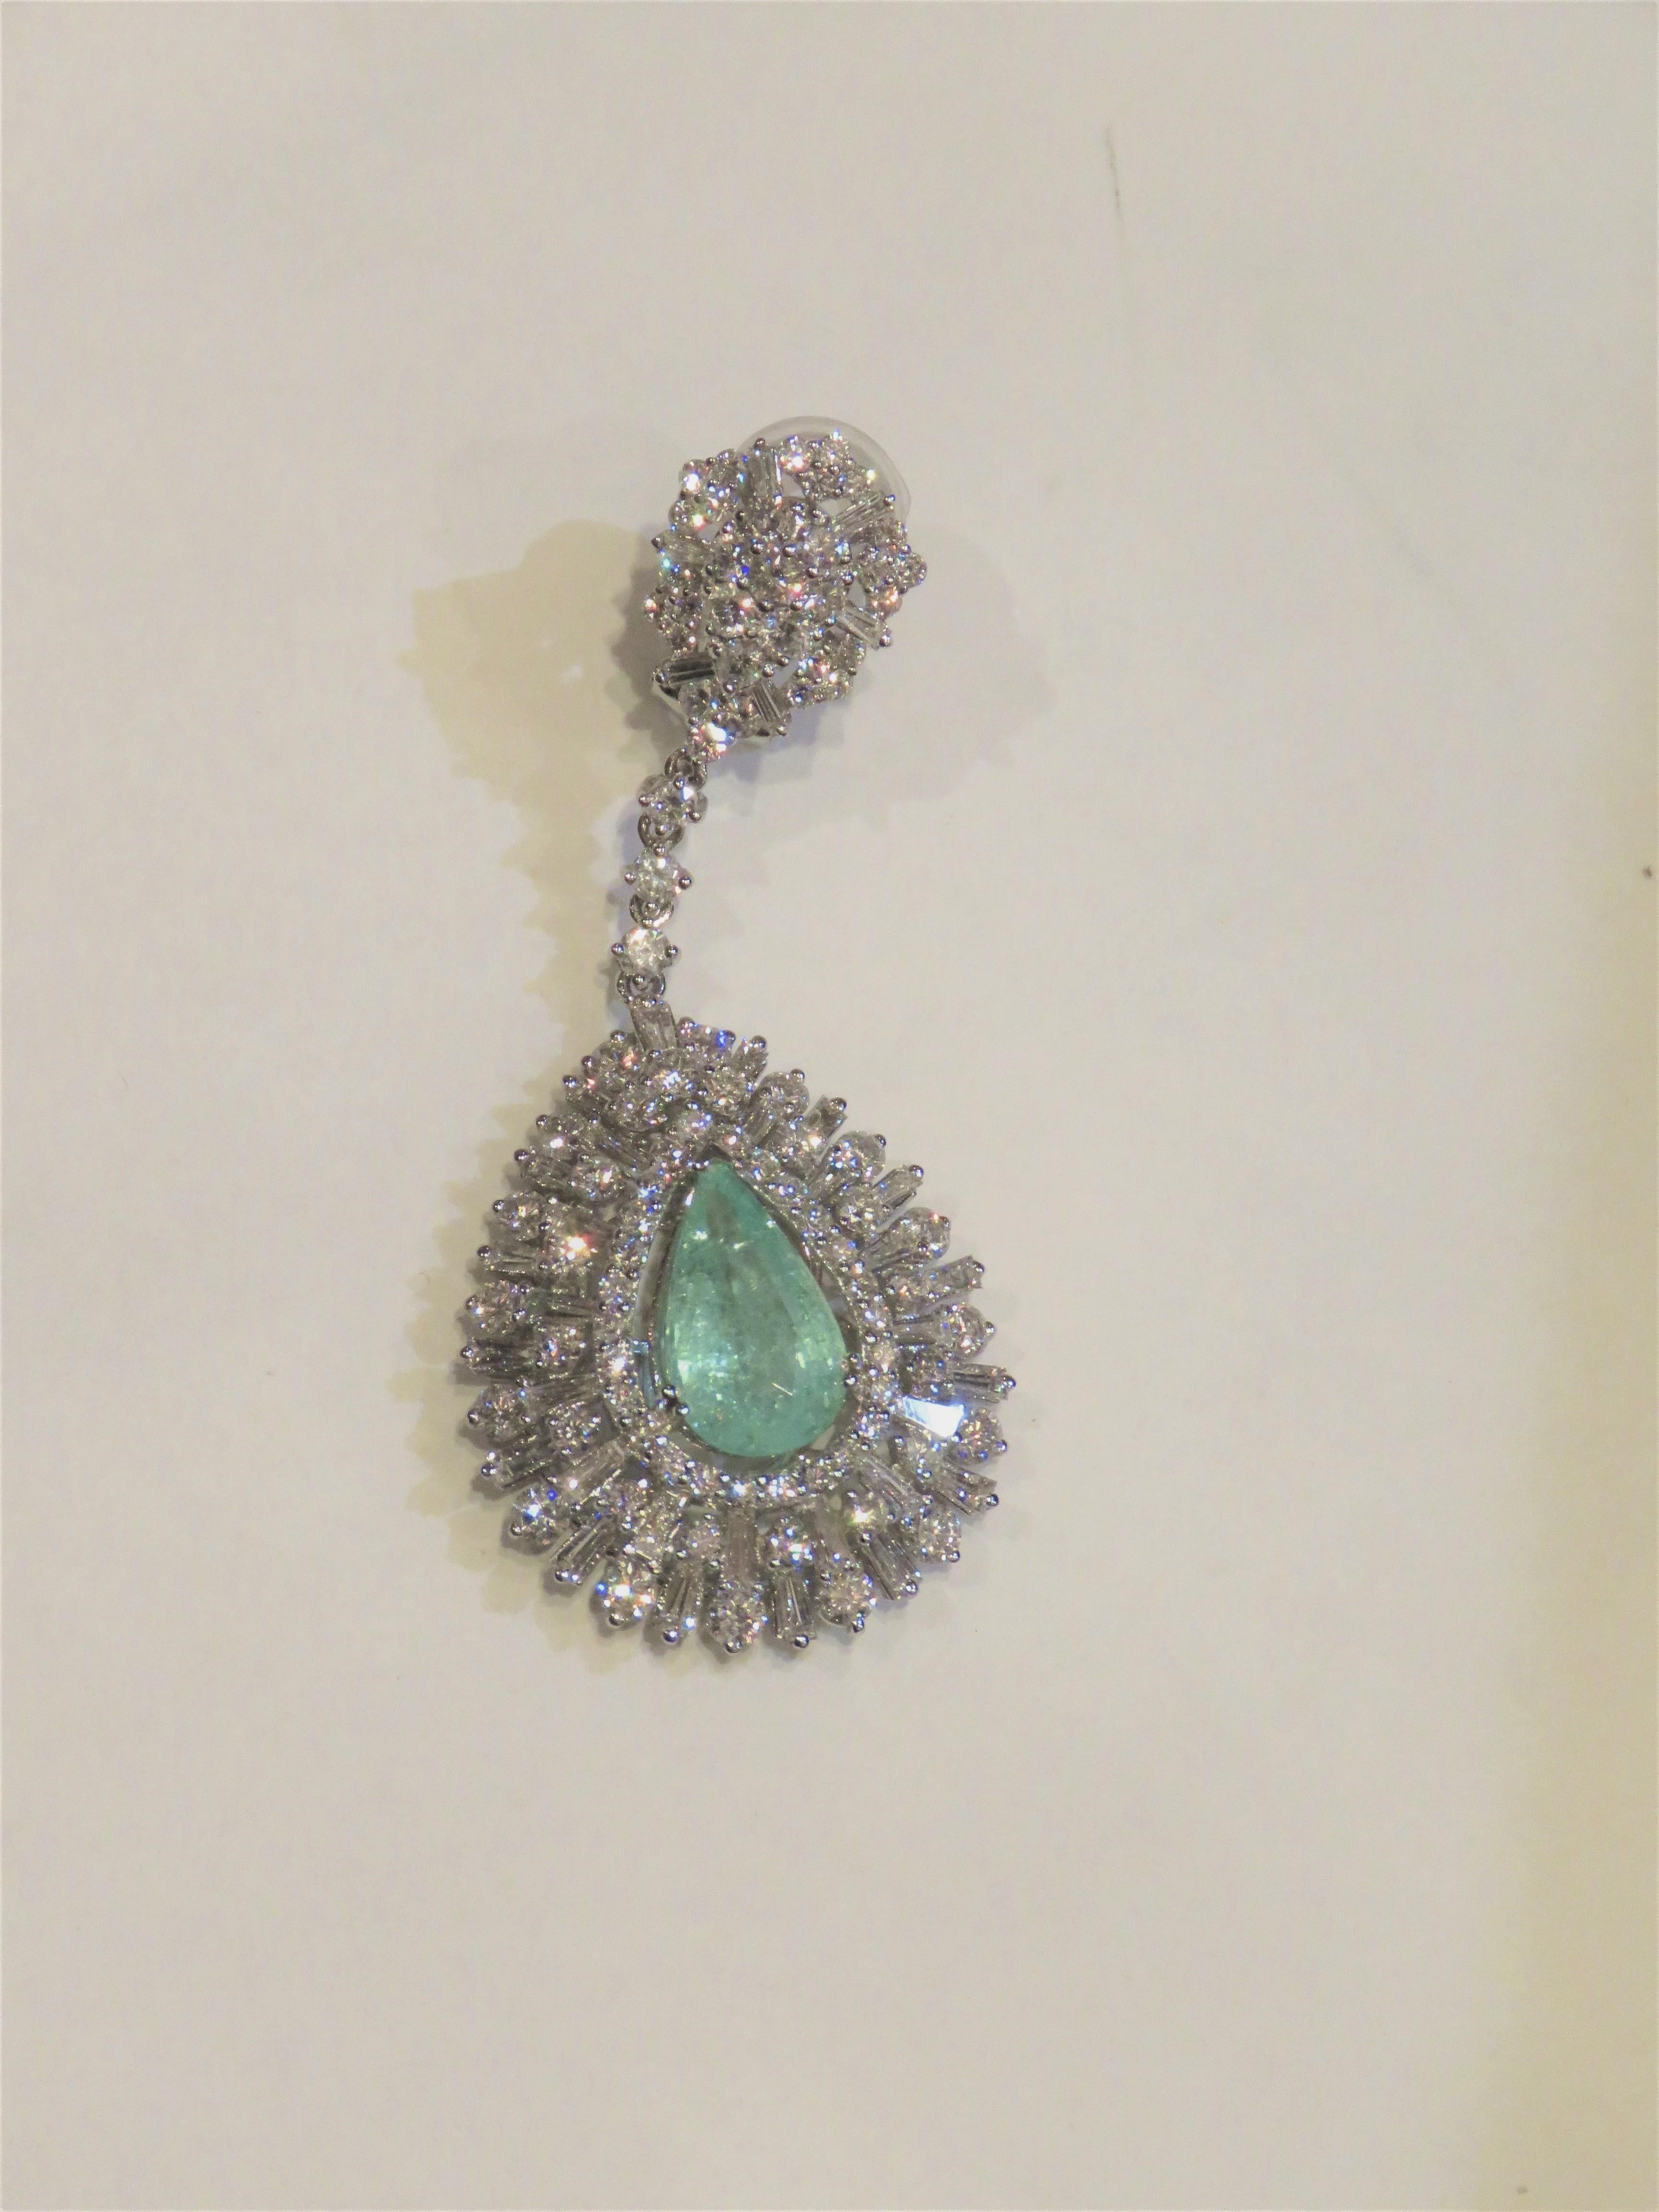 The Following Items we are offering is a Rare Important Spectacular and Brilliant 18KT Gold Large Gorgeous Fancy Large, Paraiba and Diamond Dangle Earrings. Earrings consists of Rare Fine Magnificent Paraibas surrounded and Framed with Gorgeous